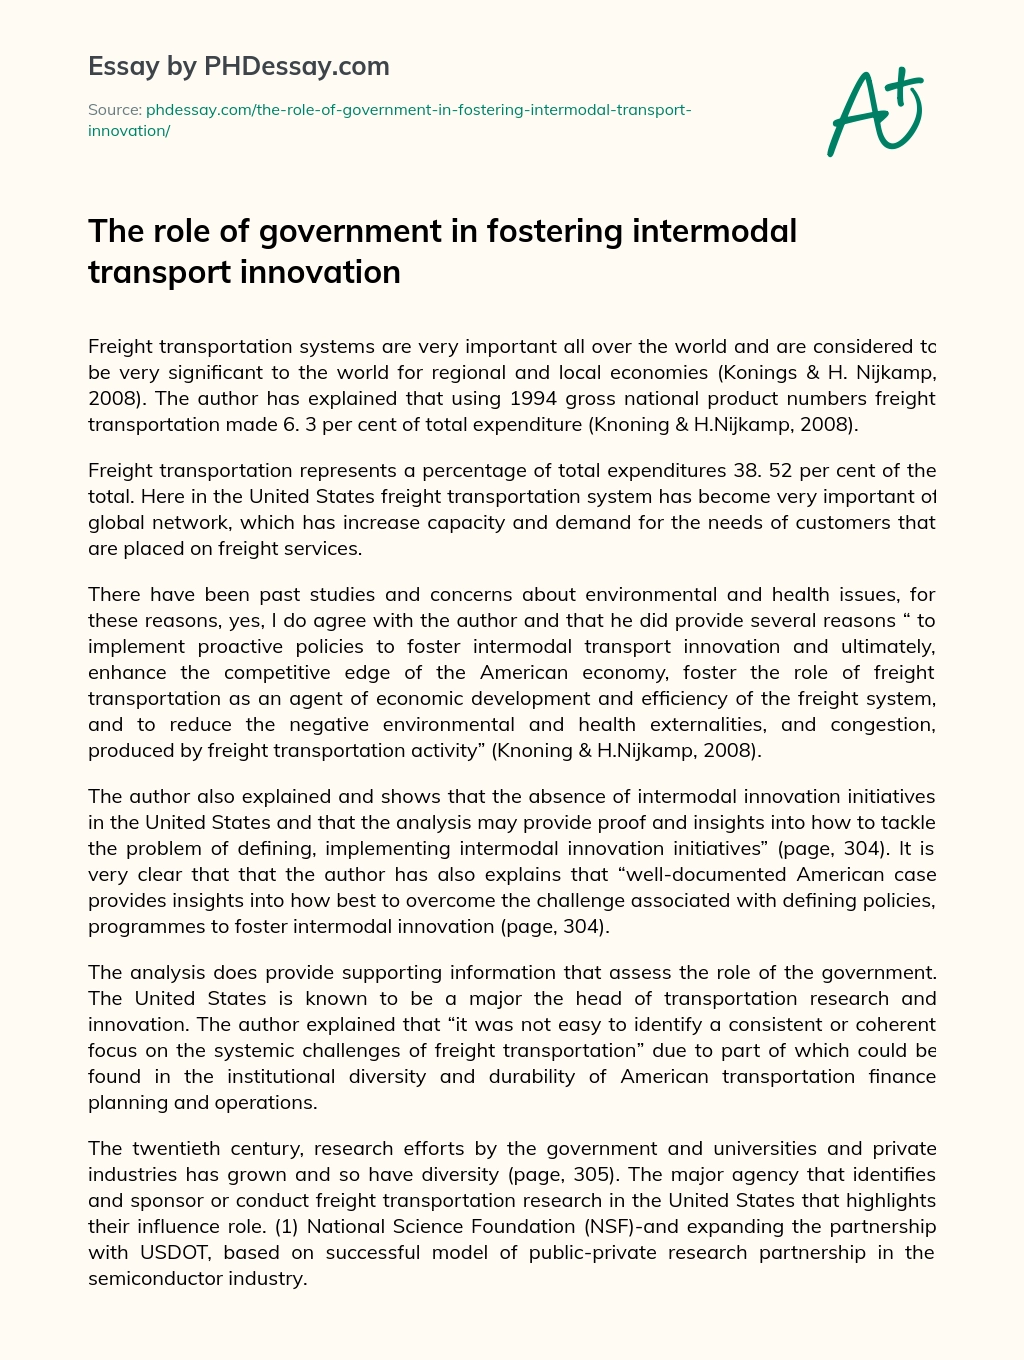 The role of government in fostering intermodal transport innovation essay